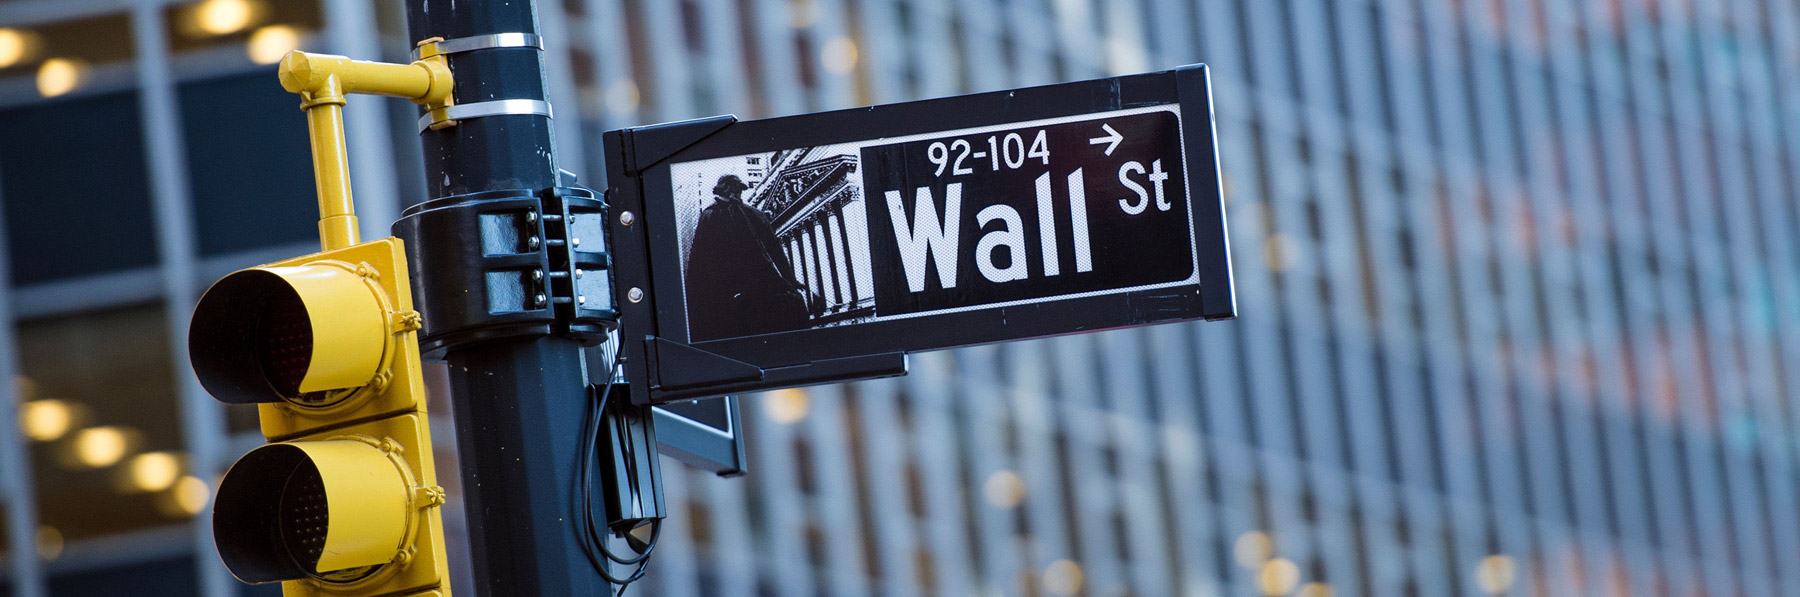 Wall street sign with blurred building